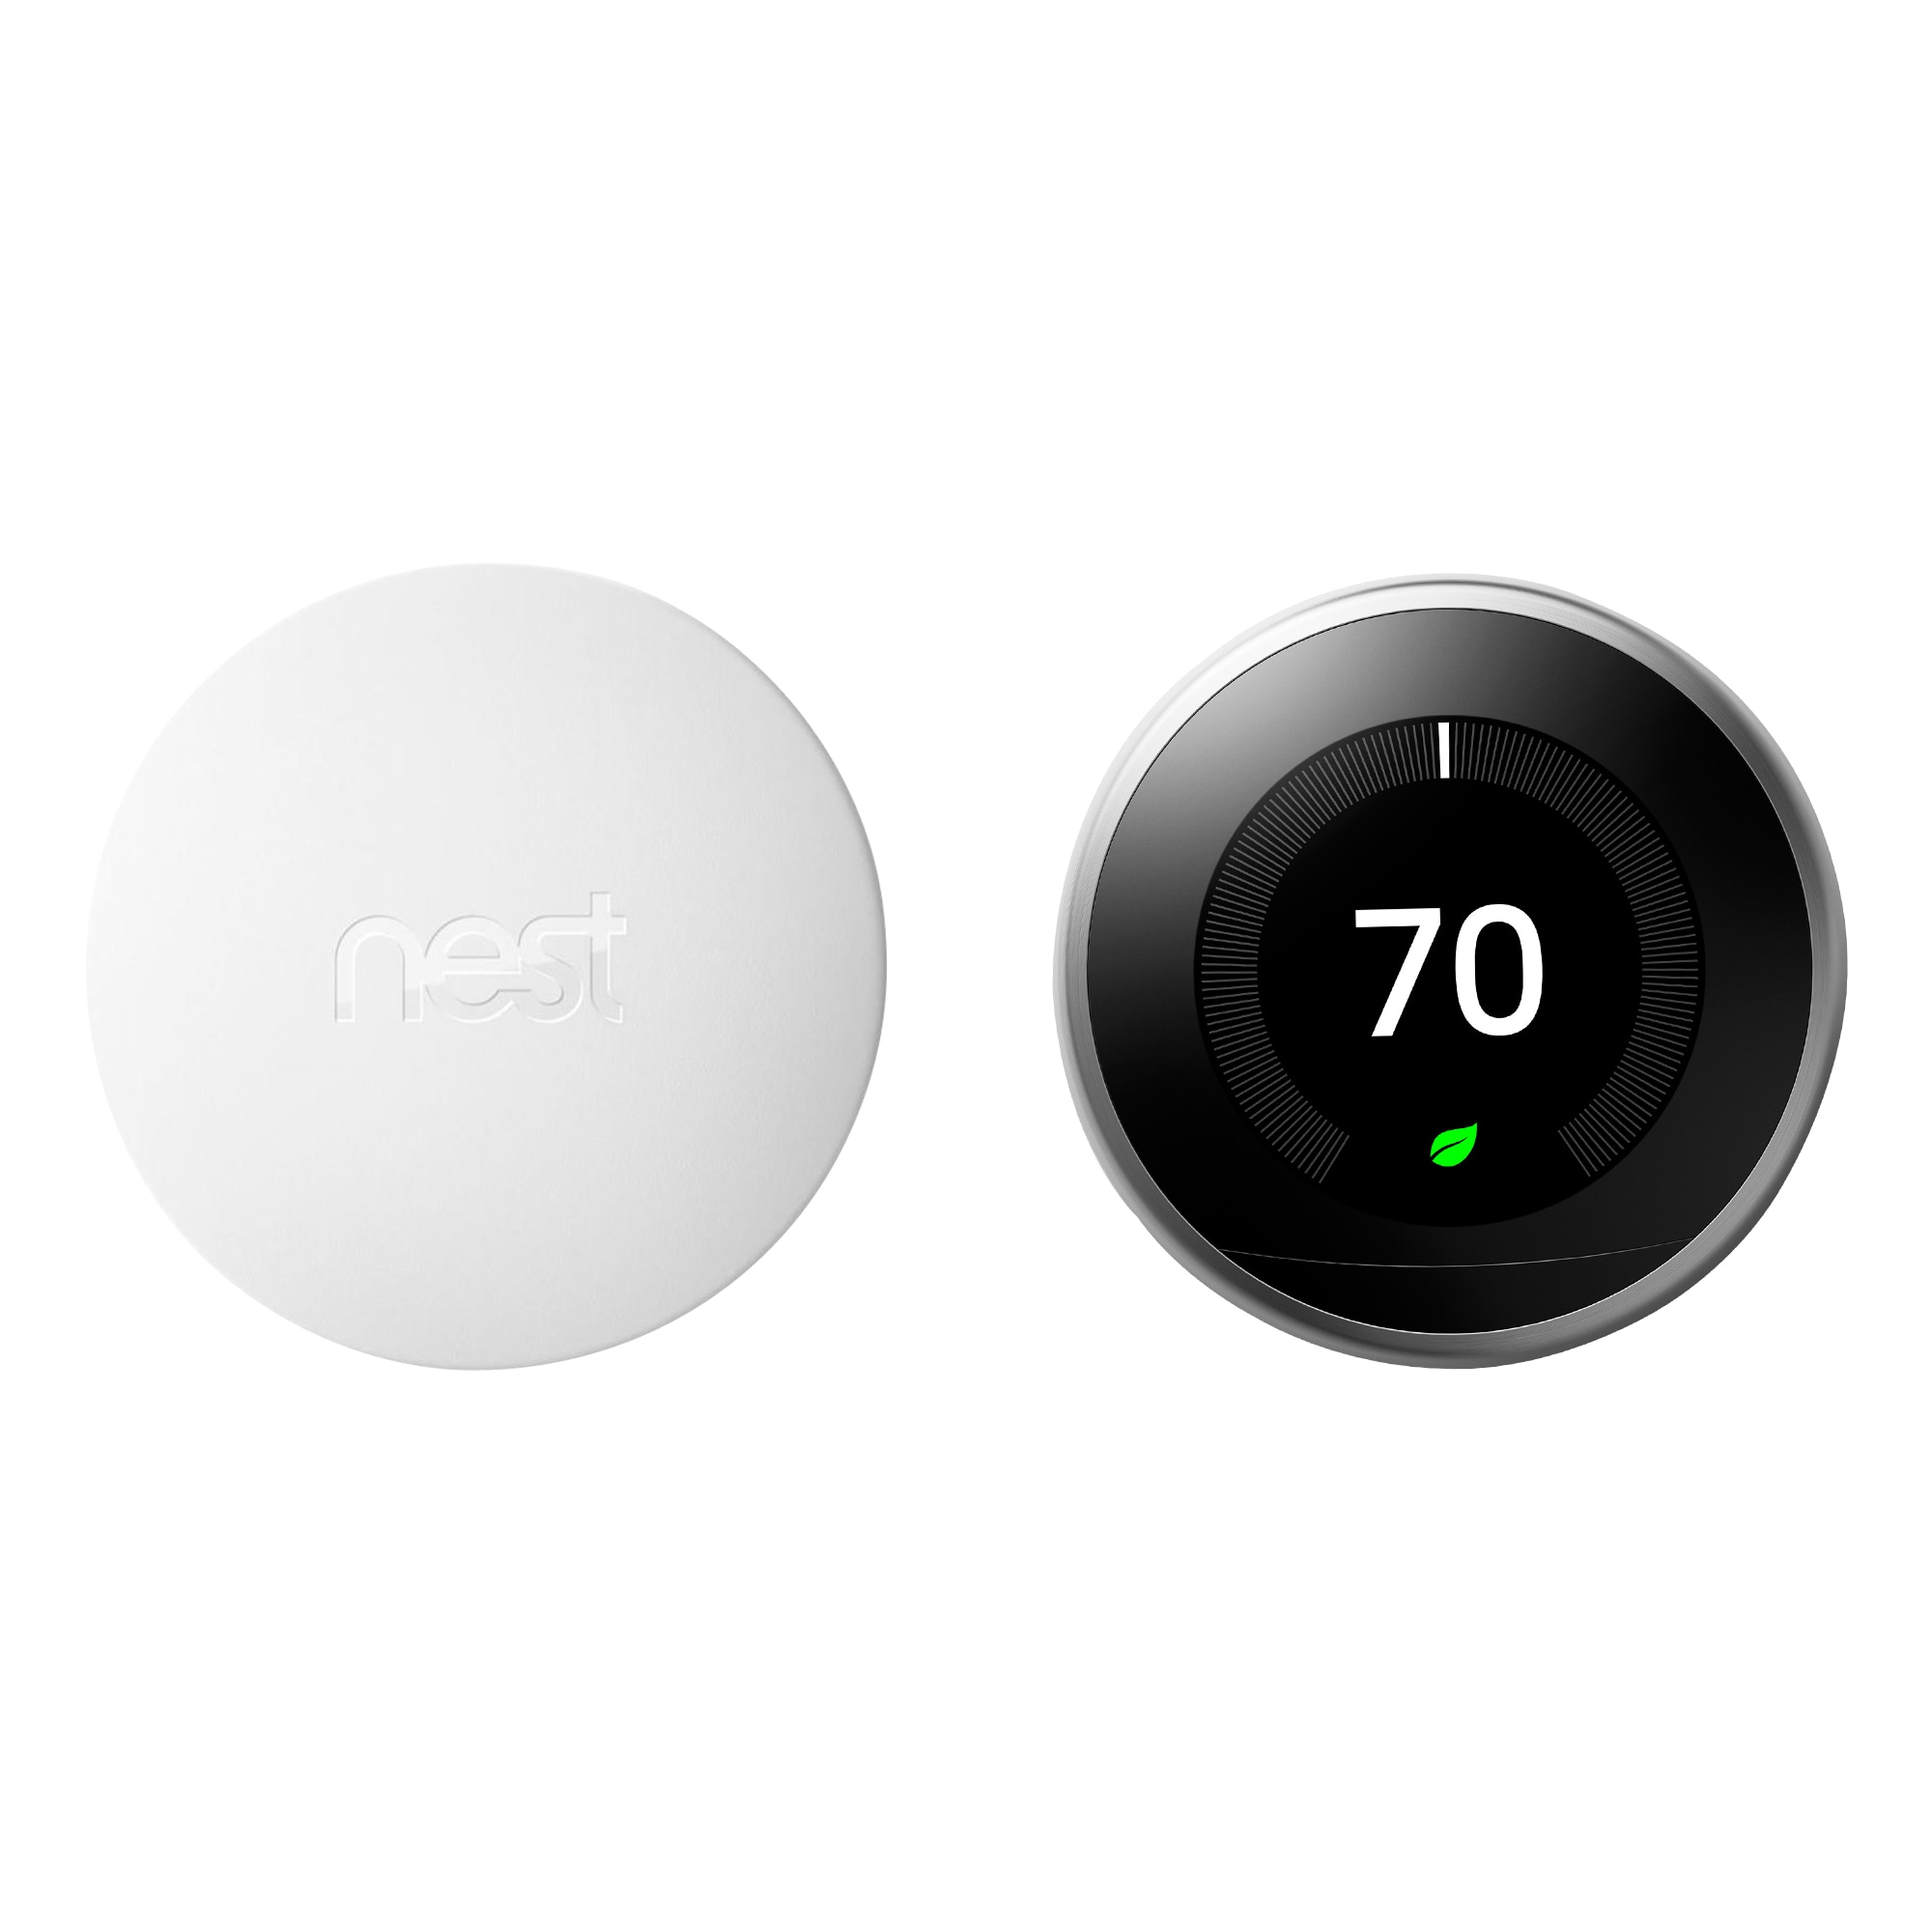 Google Google Nest Learning Thermostat 3rd Gen in Stainless Steel and Google Nest Temperature Sensor Bundle